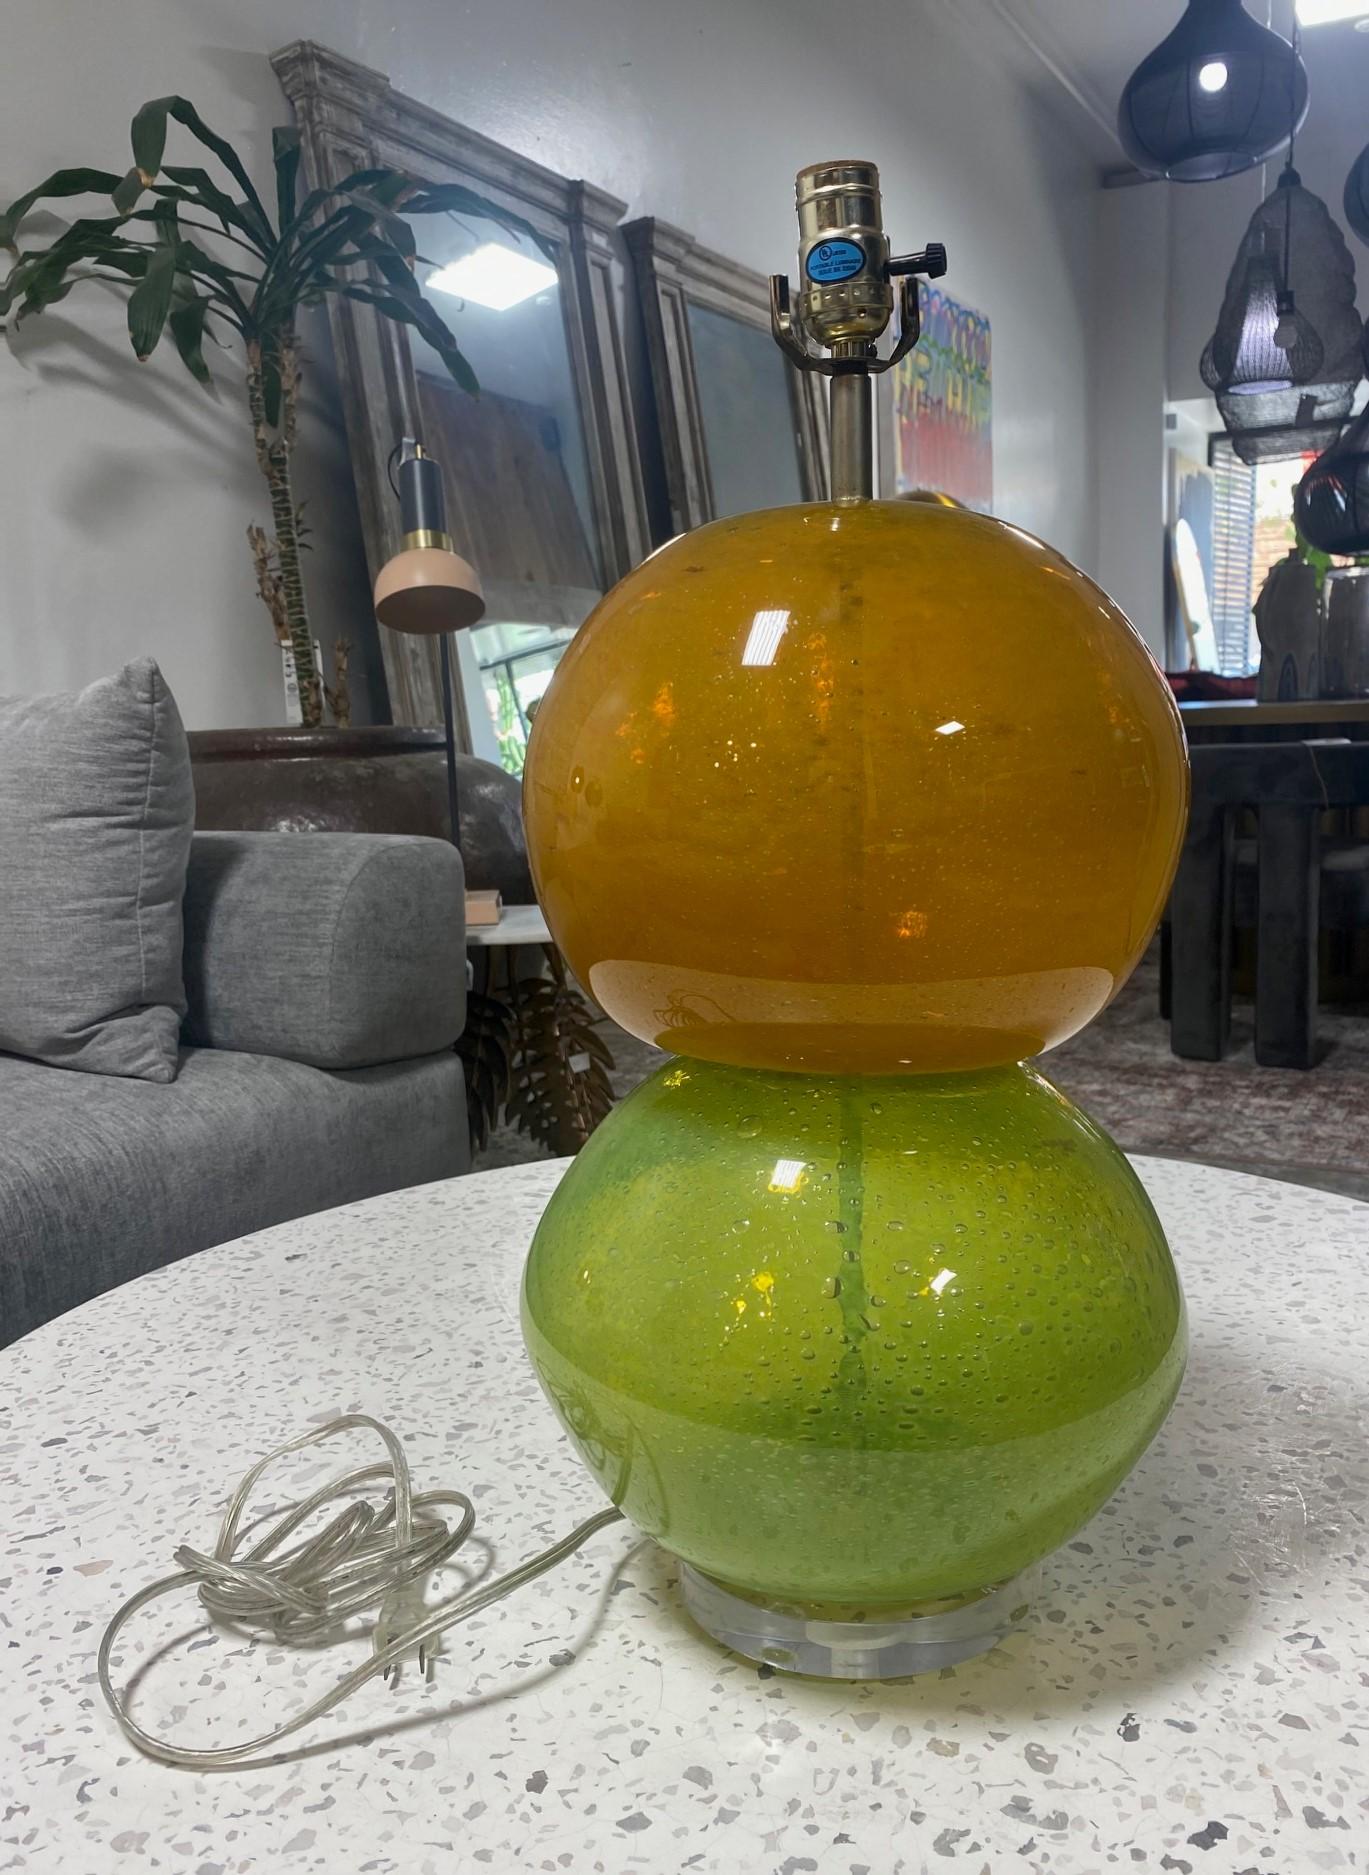 A wonderful, funky, rather playful two-colored double stacked blown glass table lamp likely from the 1960s-1980s. Great shape and design. We have not seen another quite like it. The lamp is mounted on a lucite base. 

From a Los Angeles